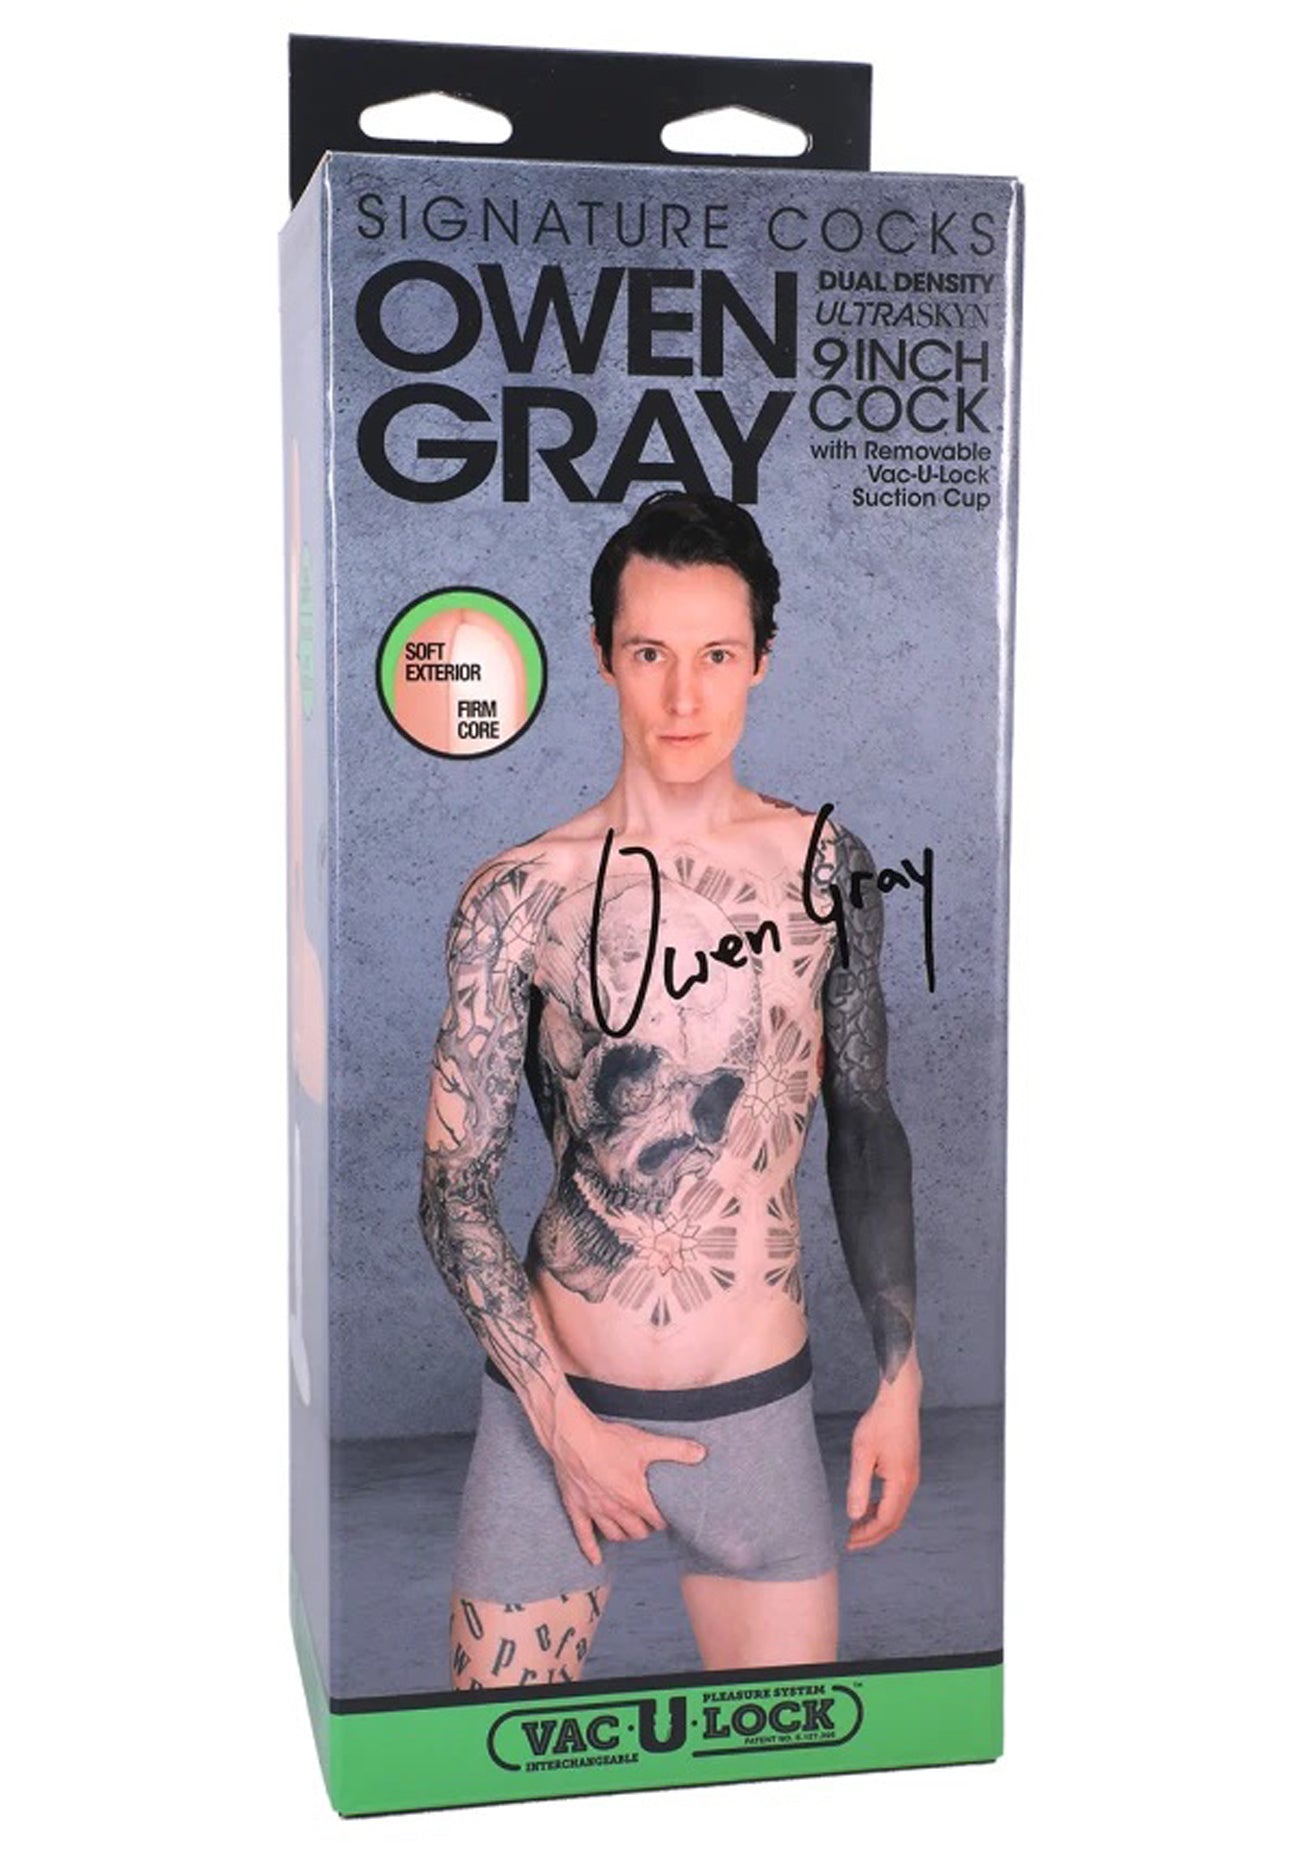 Signature Cocks - Owen Gray - 9 Inch Ultraskyn  Cock With Removable Vac-U-Lock Suction Cup - Skin Tone-2